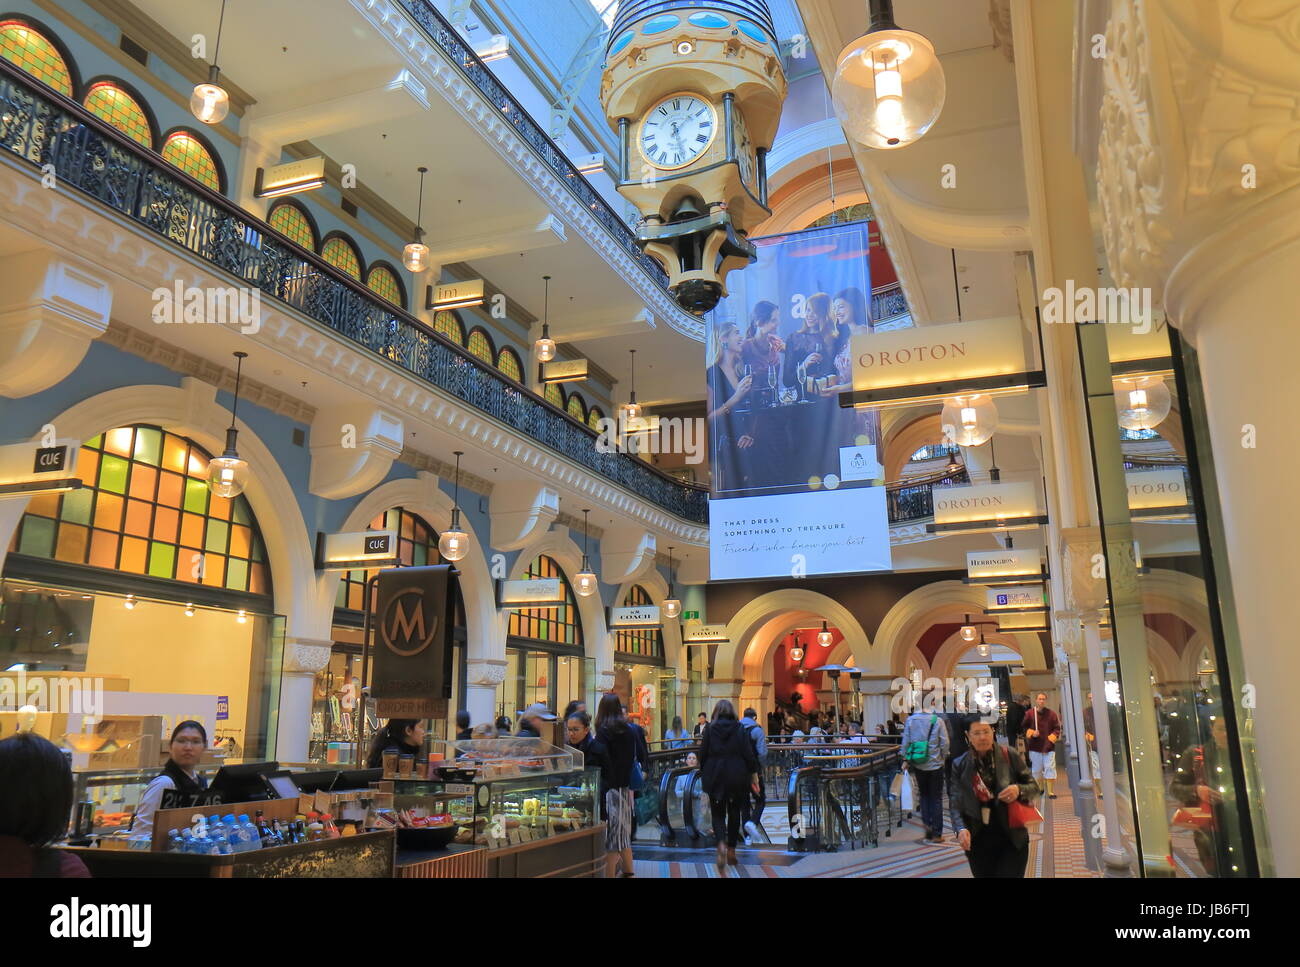 People visit Queen Victoria building historical shopping mall in Sydney Australia. Stock Photo